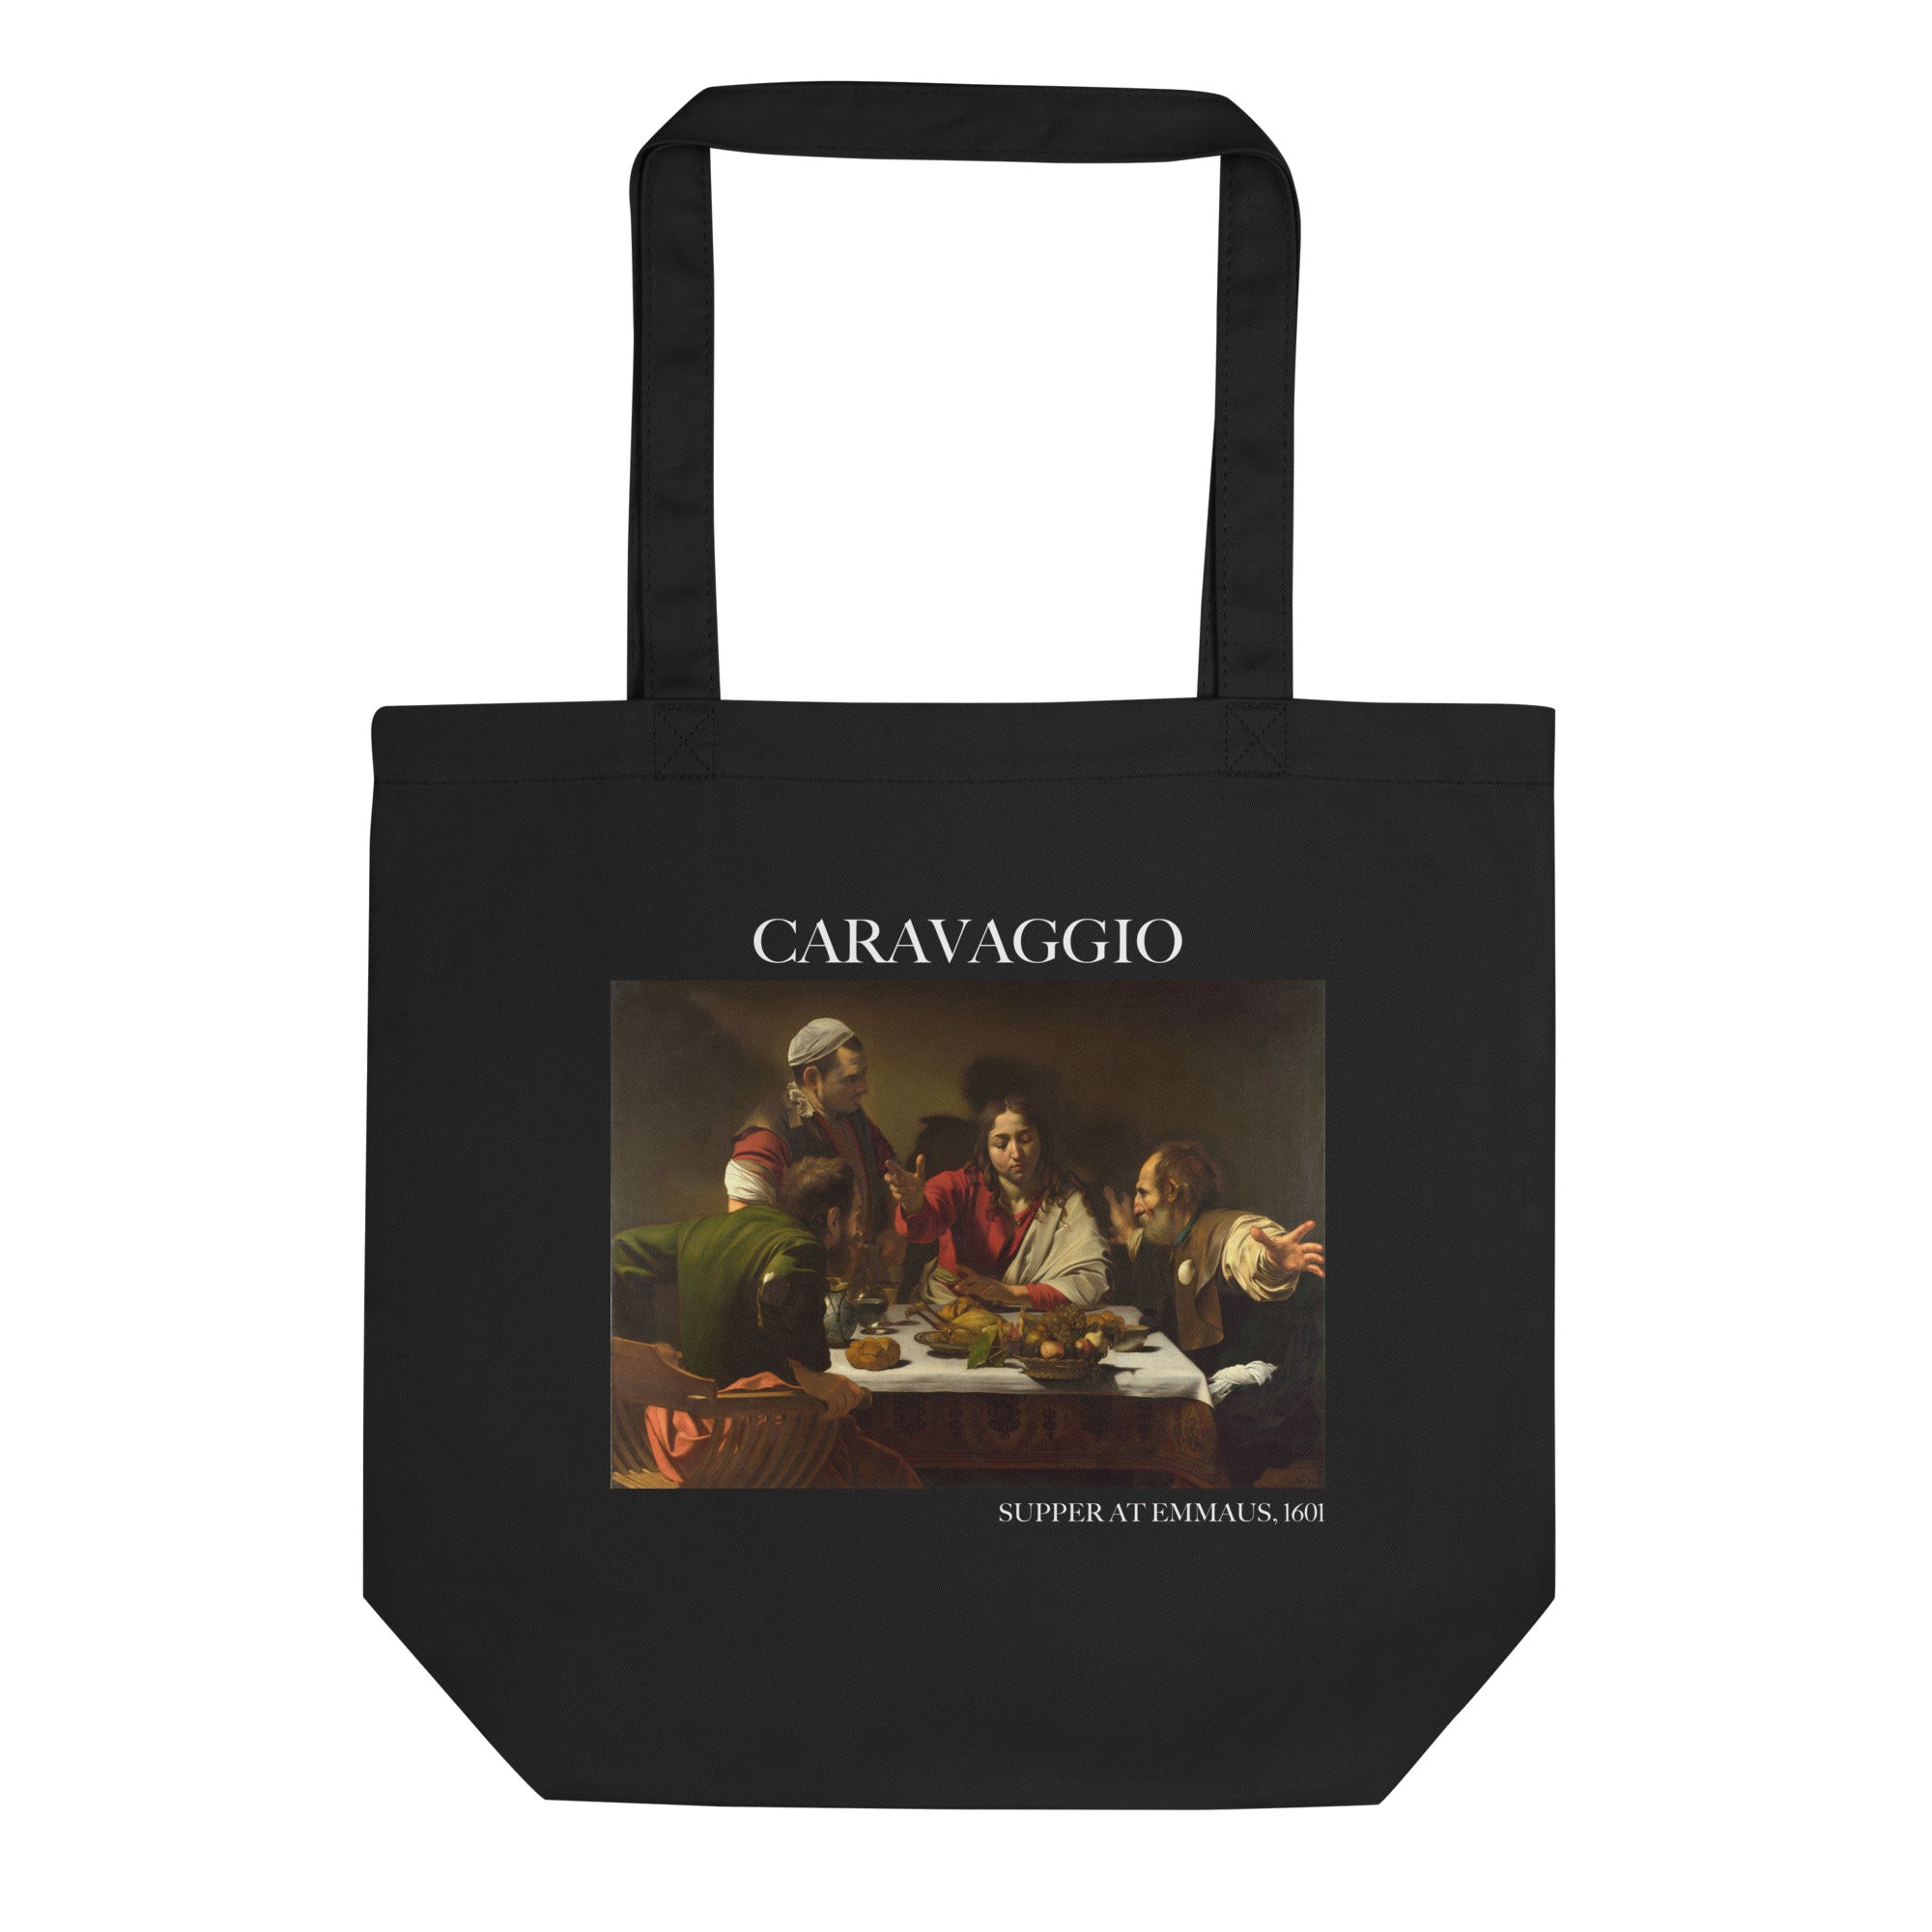 Caravaggio 'Supper at Emmaus' Famous Painting Totebag | Eco Friendly Art Tote Bag